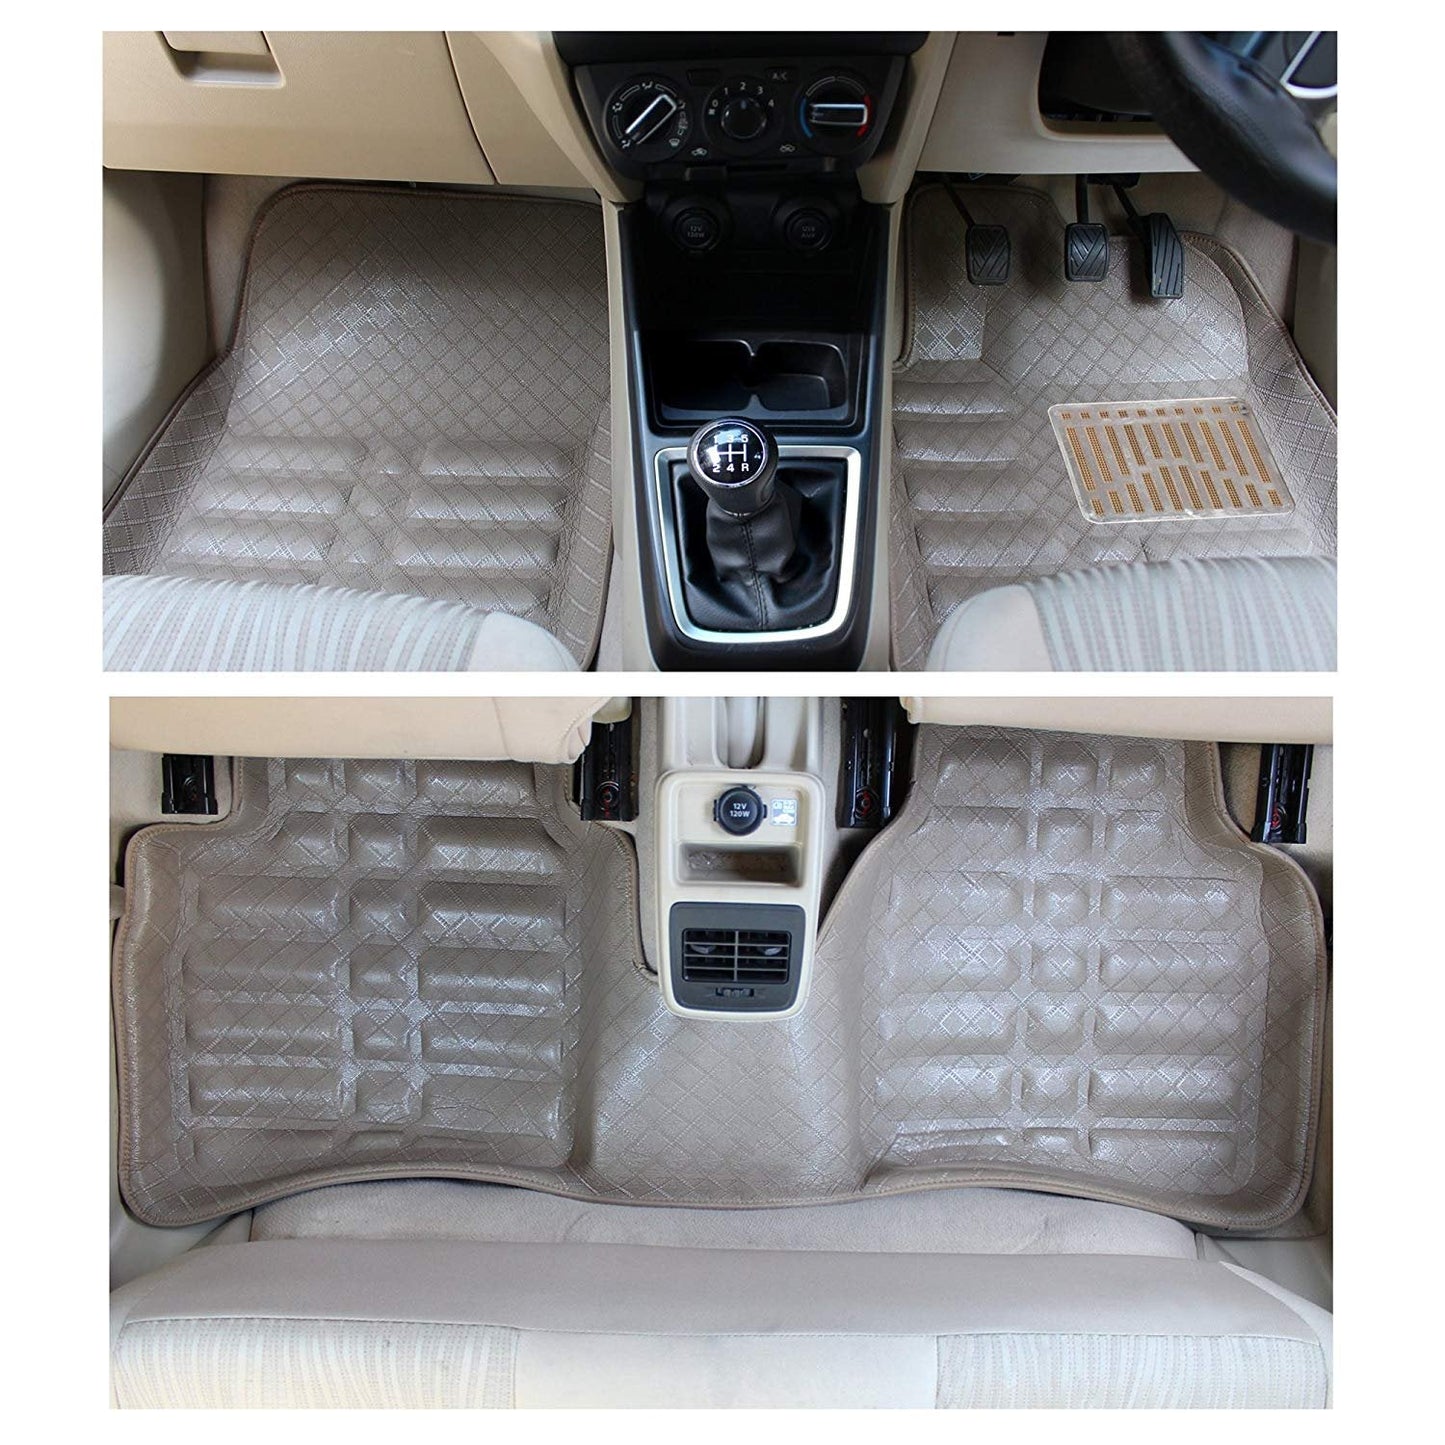 Oshotto 4D Artificial Leather Car Floor Mats For Nissan Magnite - Set of 3 (2 pcs Front & one Long Single Rear pc) - Beige